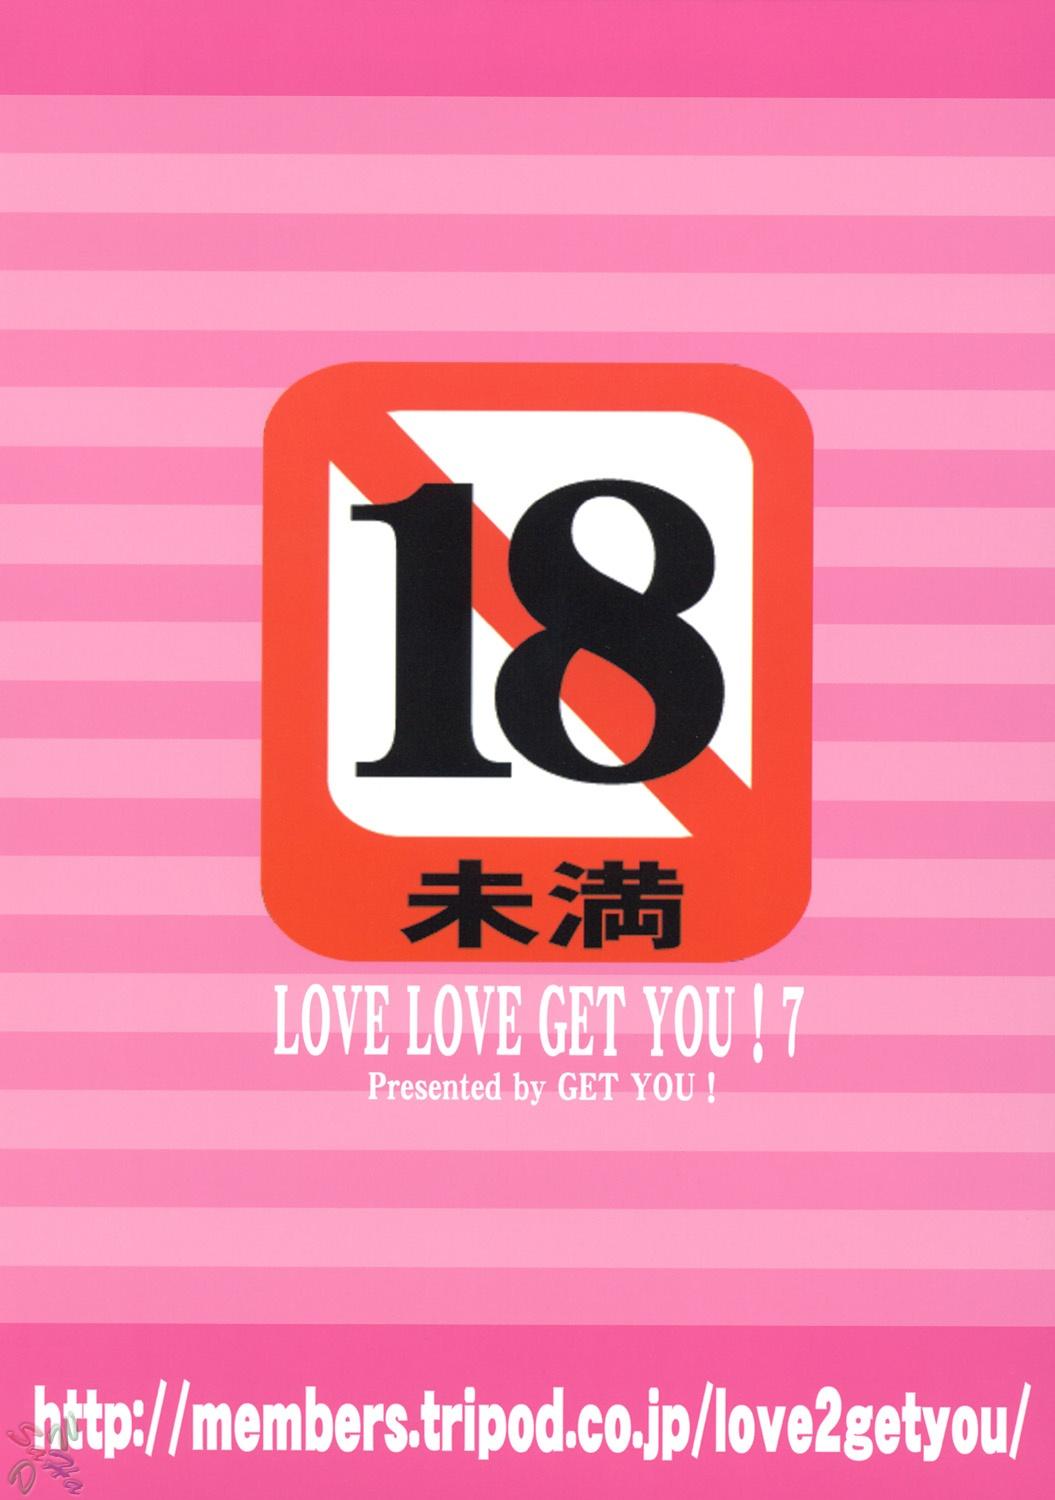 LOVE LOVE GET YOU! 7 34